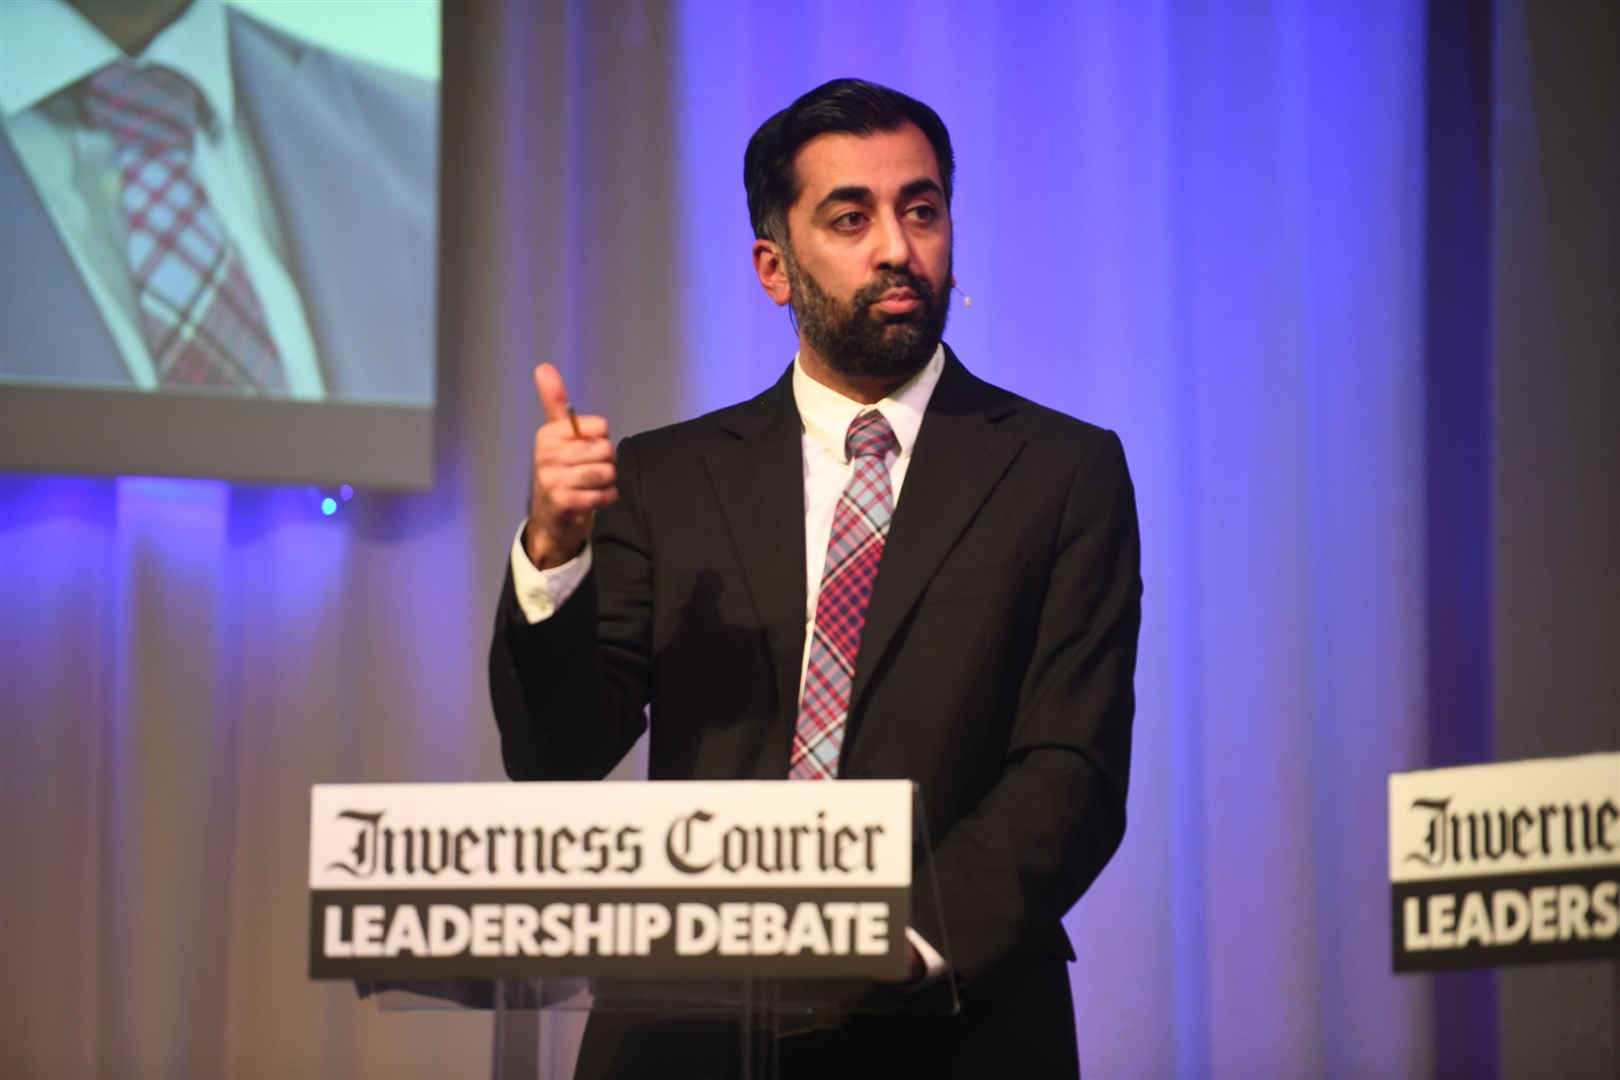 Along with the other candidates, Humza Yousaf was asked about the decentralisation of 999 call handing services during the Inverness Courier Leadership Debate.